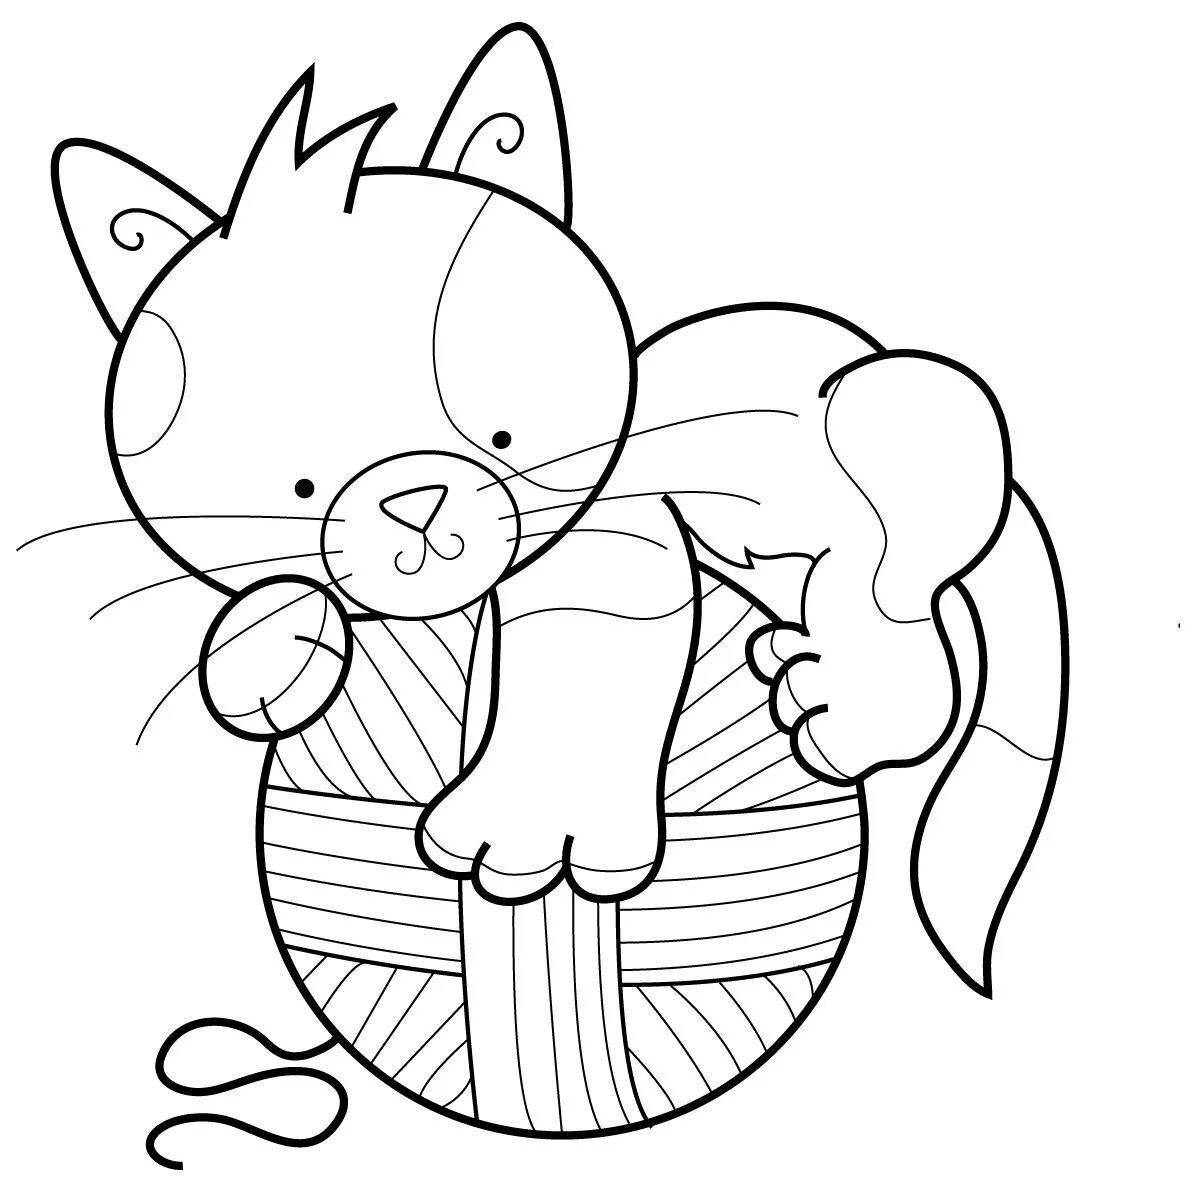 Coloring book cheerful wooden cat